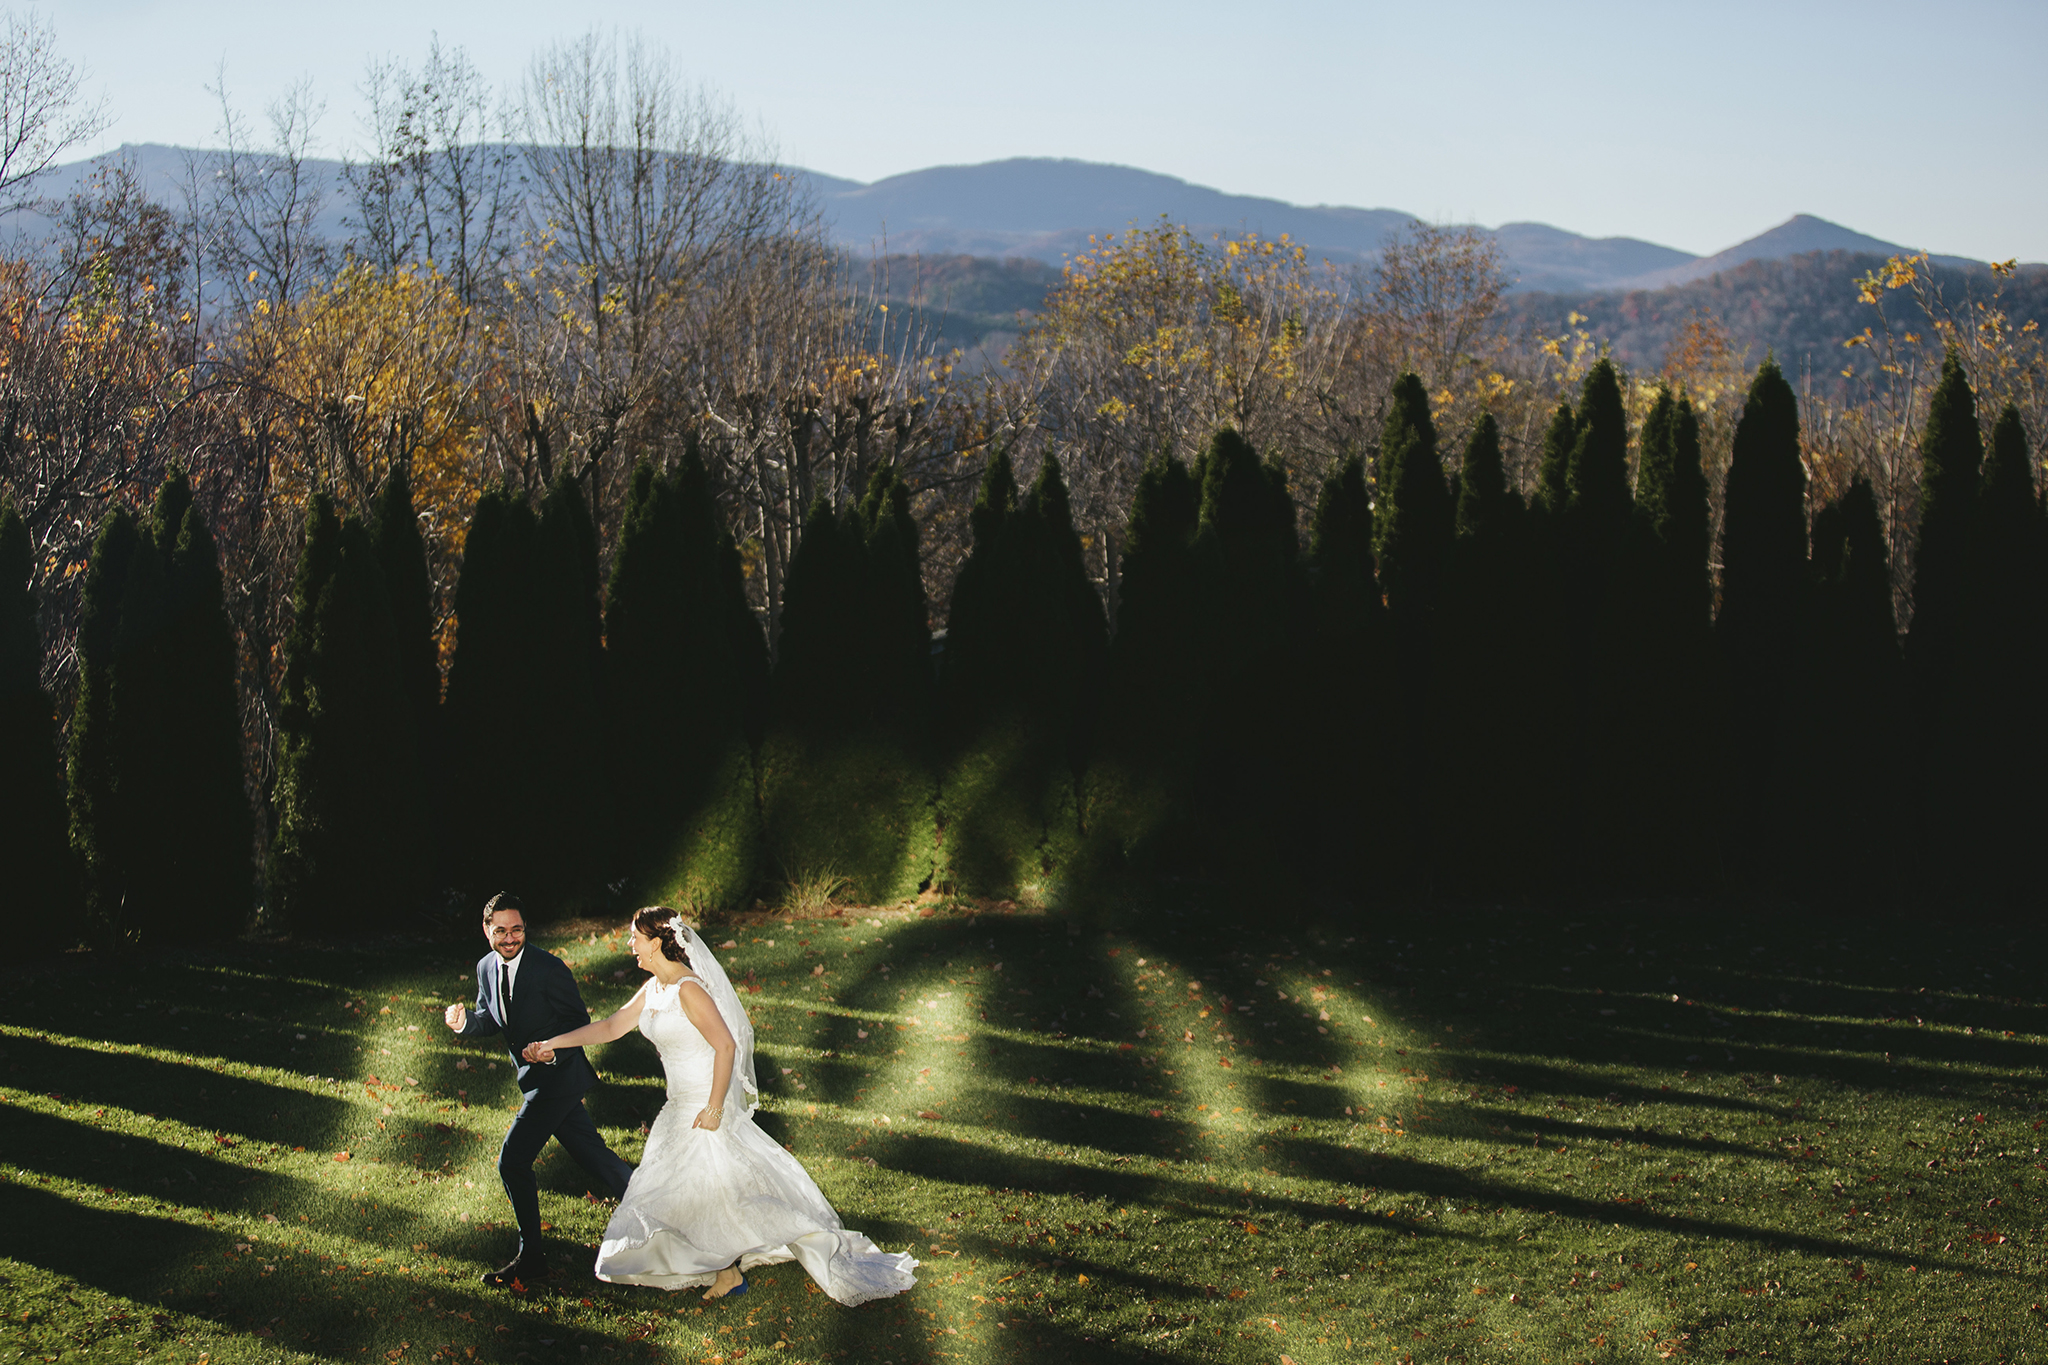 Daniel & Mabyn of Mabyn Ludke Photography run across the lawn at the Inn at Creswood where they had their Blowing Rock NC wedding